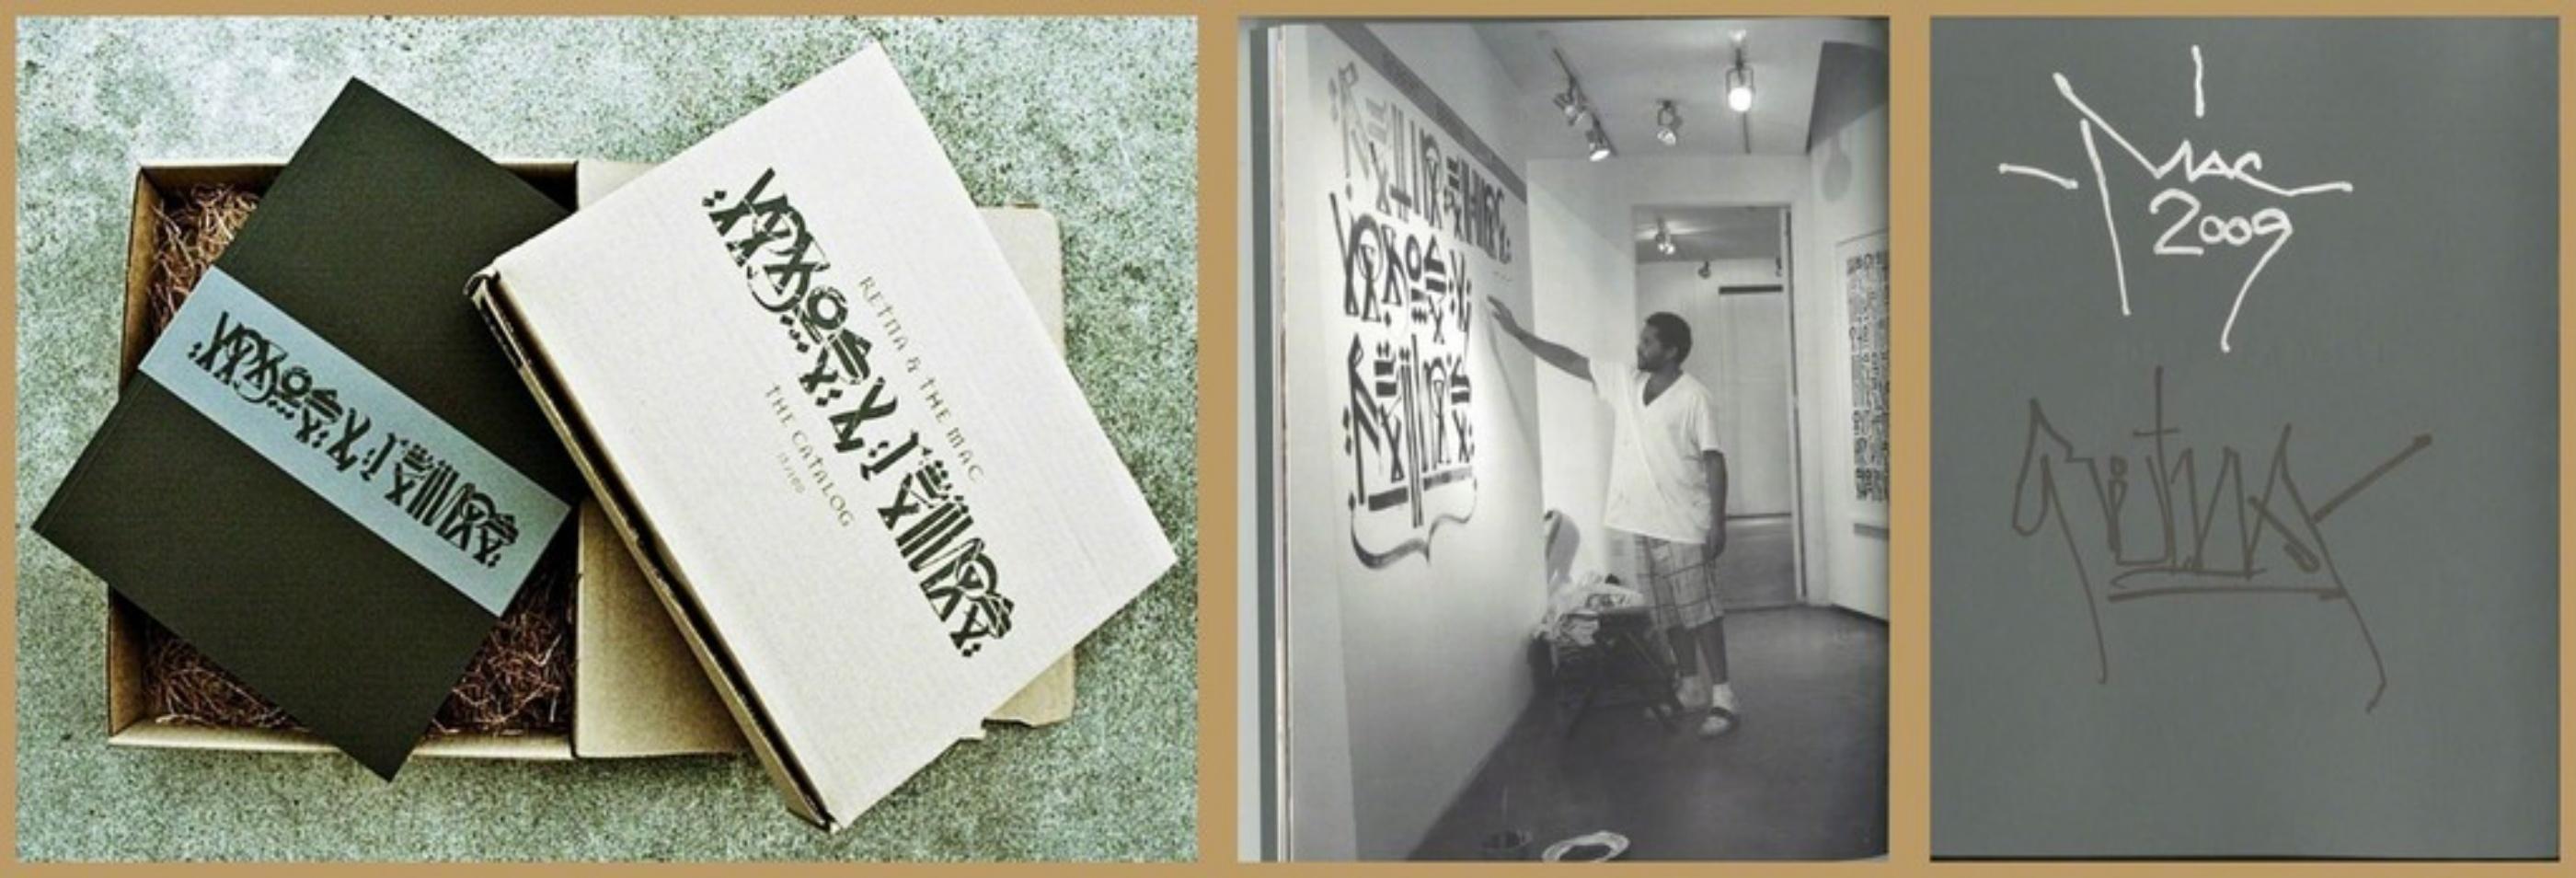 Vagos y Reinas (Vagabonds and Queens), Hand Signed, Numbered by RETNA and El Mac For Sale 2